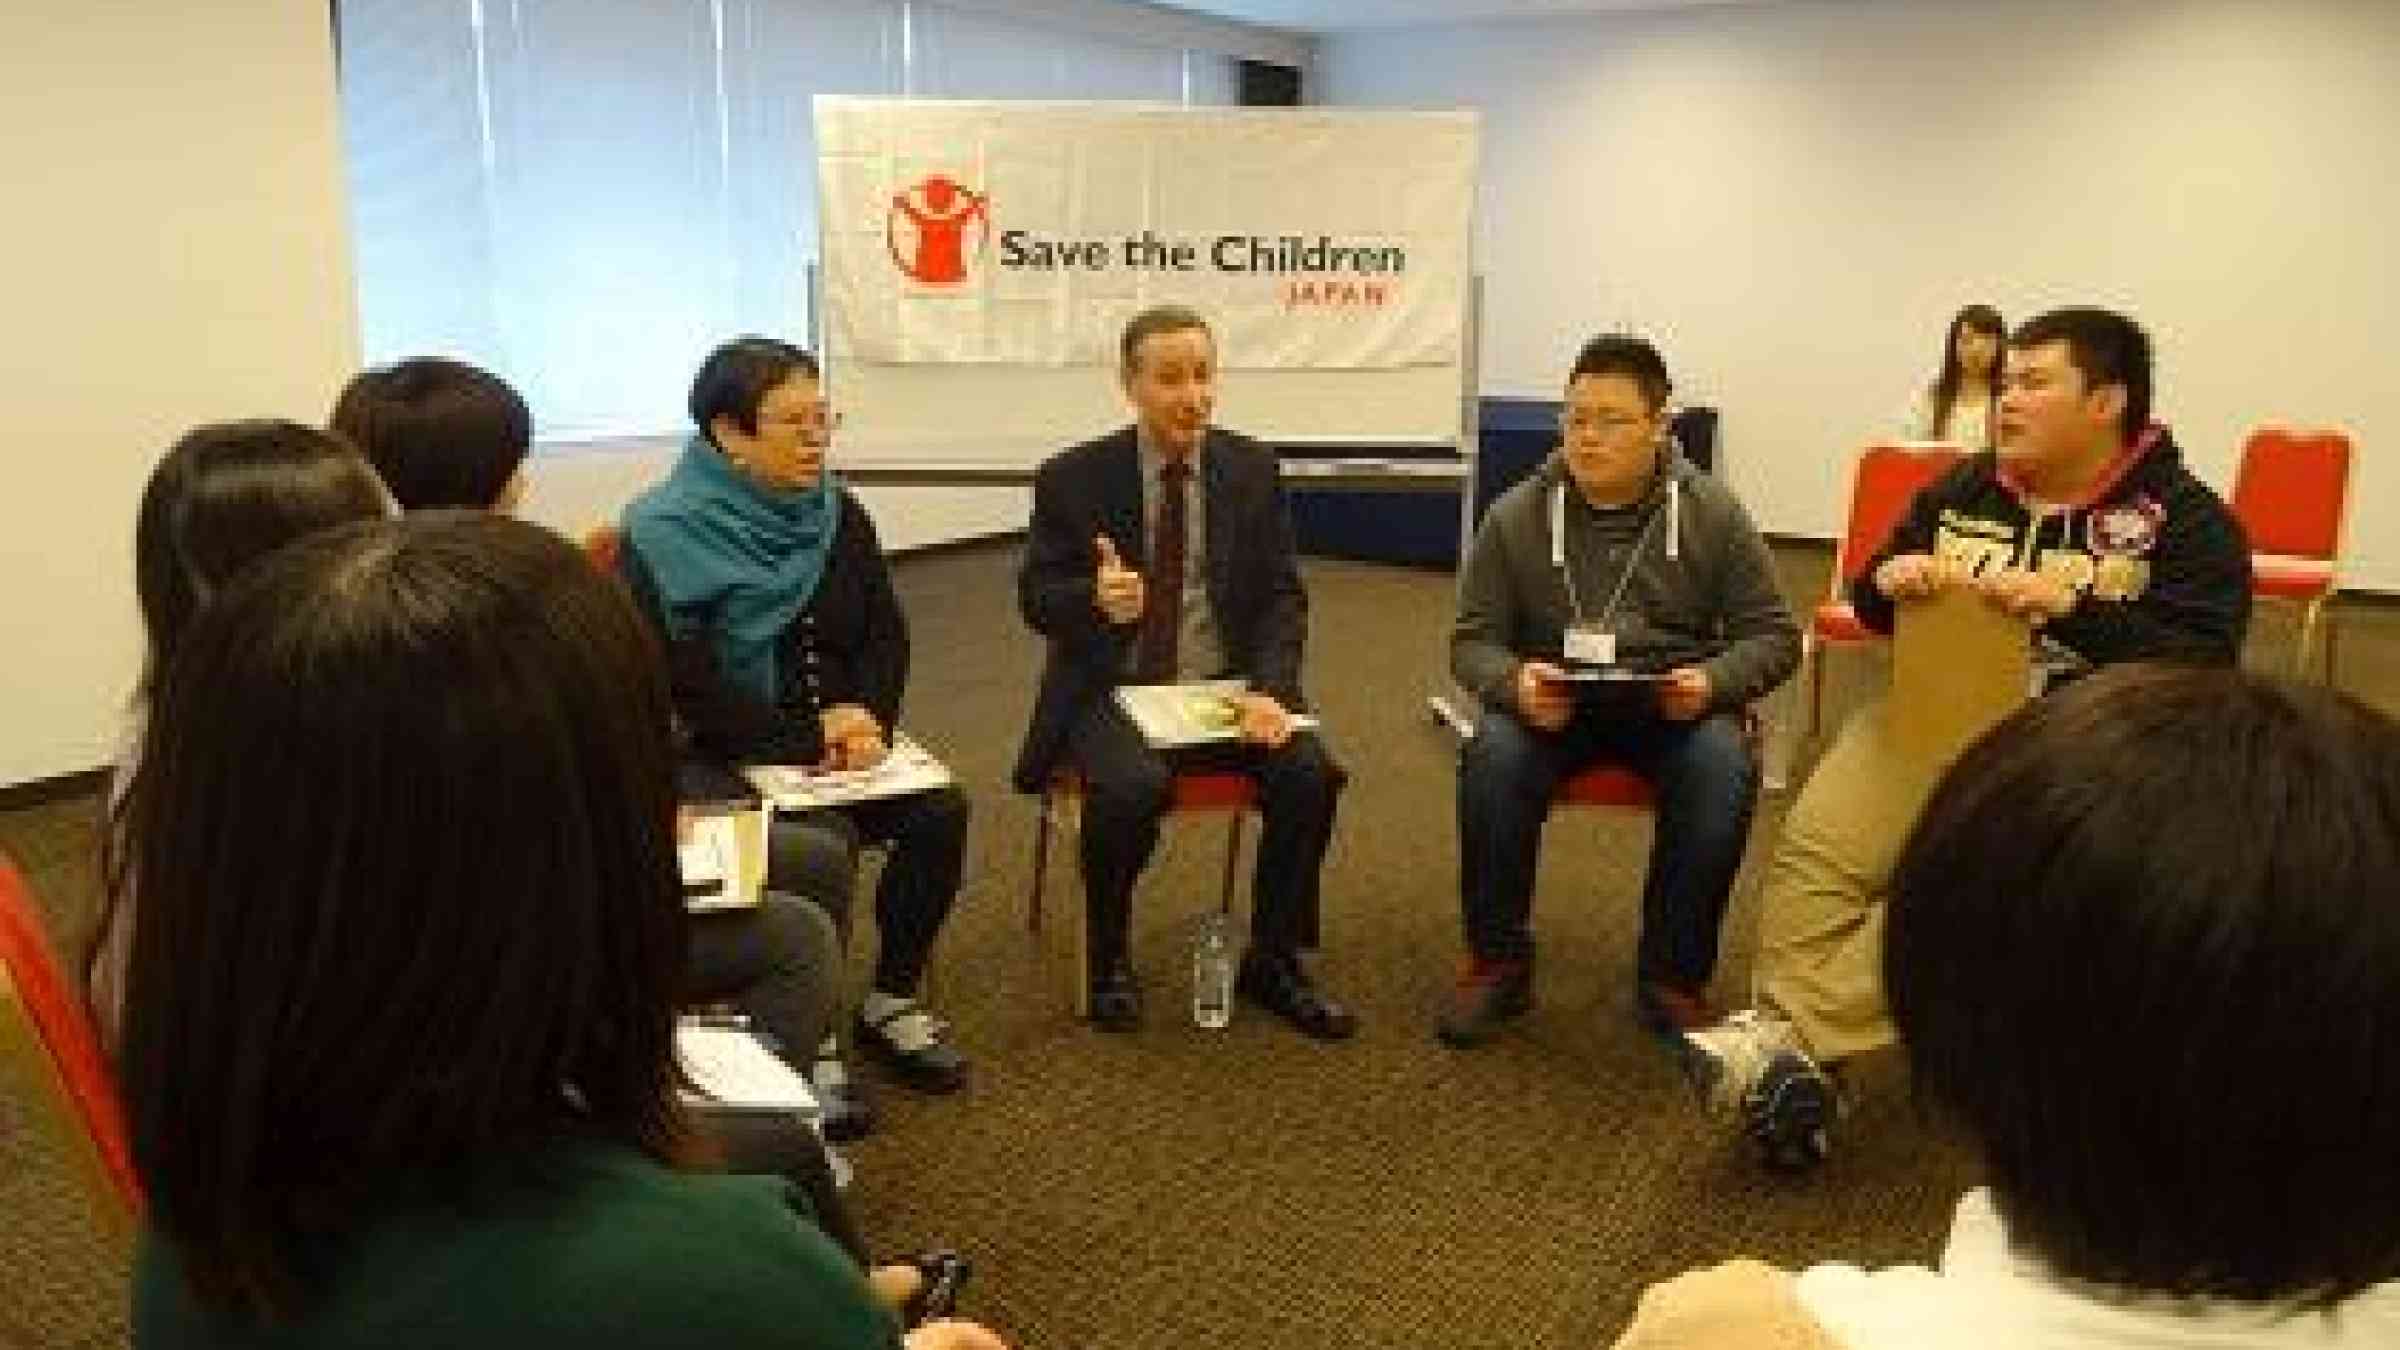 The head of UNISDR, Mr. Robert Glasser, speaking with children from the Tohoku region of Japan, who survived the 2011 Great East Japan Earthquake and Tsunami